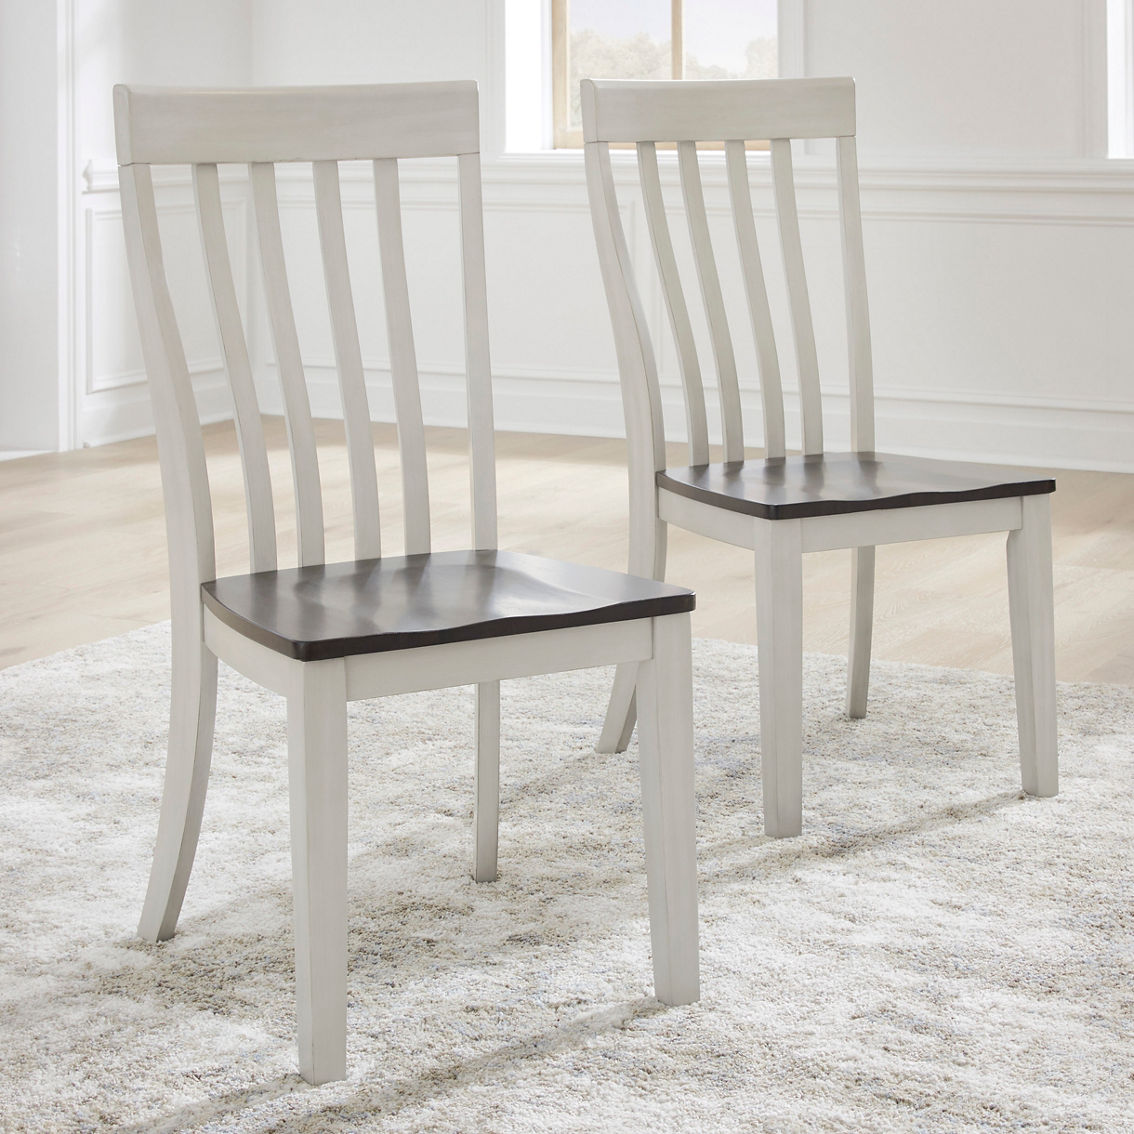 Signature Design by Ashley Darborn 9 pc. Dining Set: Table, 8 Chairs - Image 3 of 9